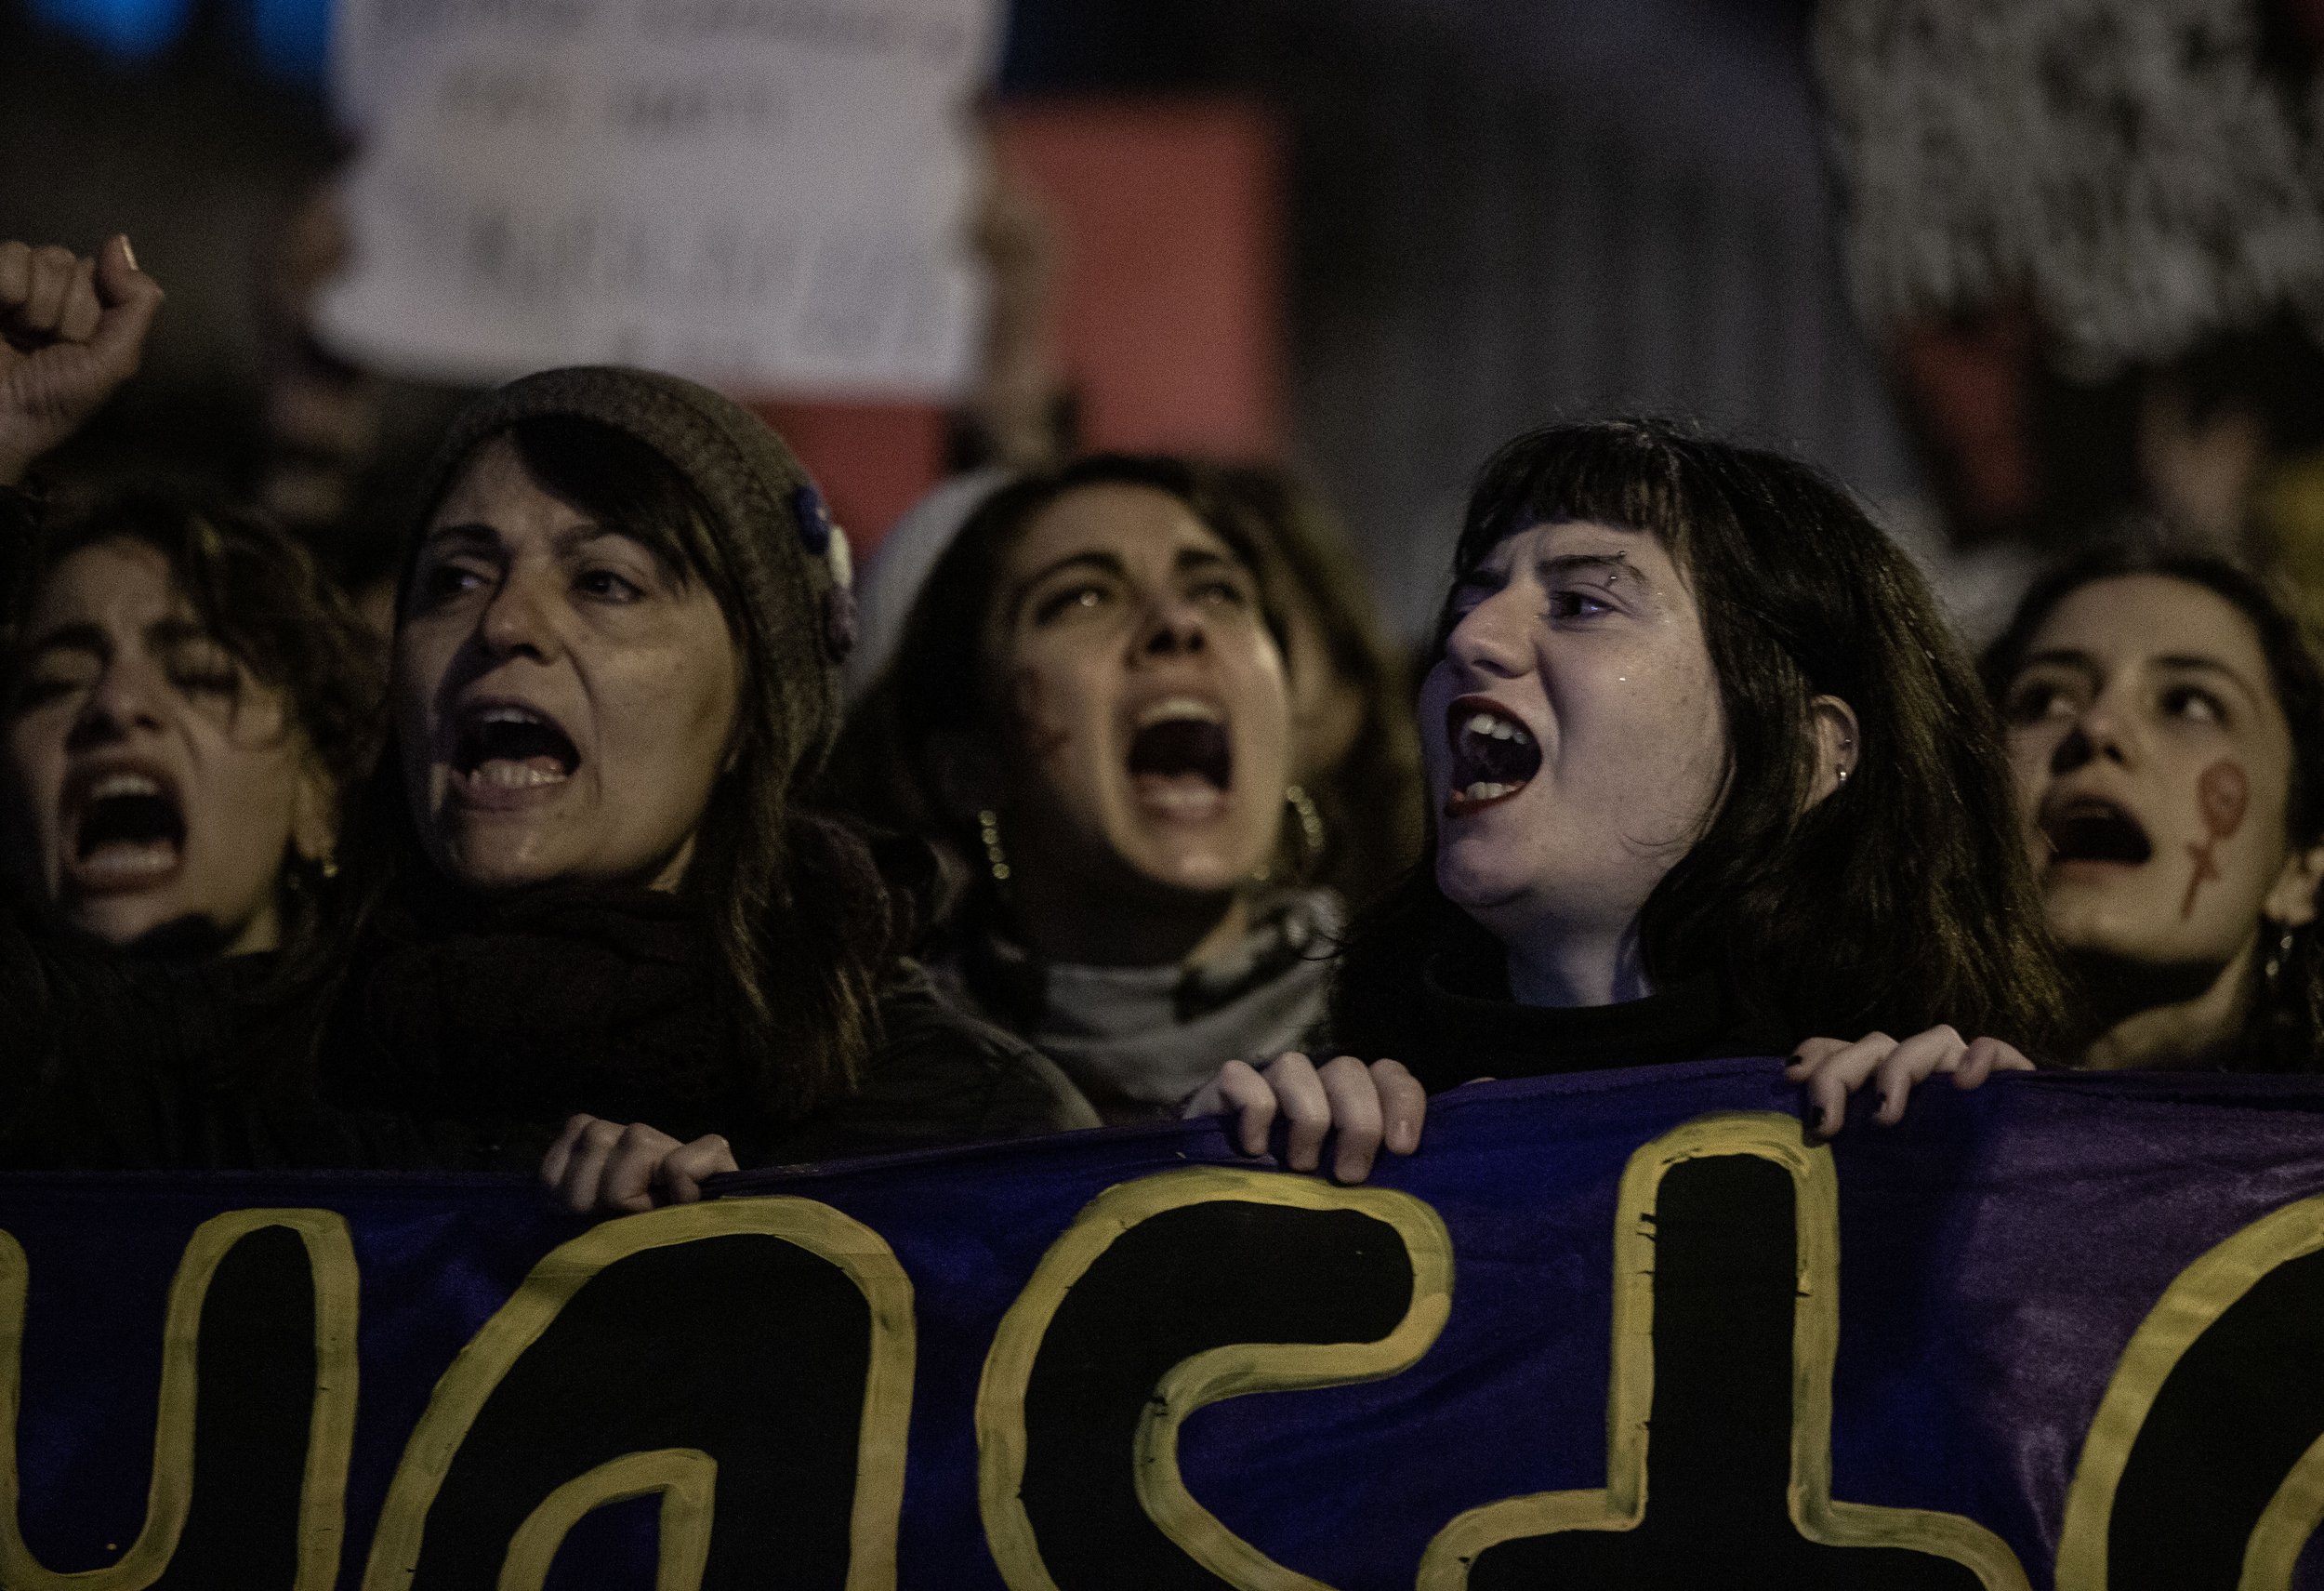  Women scream their demands as police start to close in on the thousands in the street protesting women’s rights.  